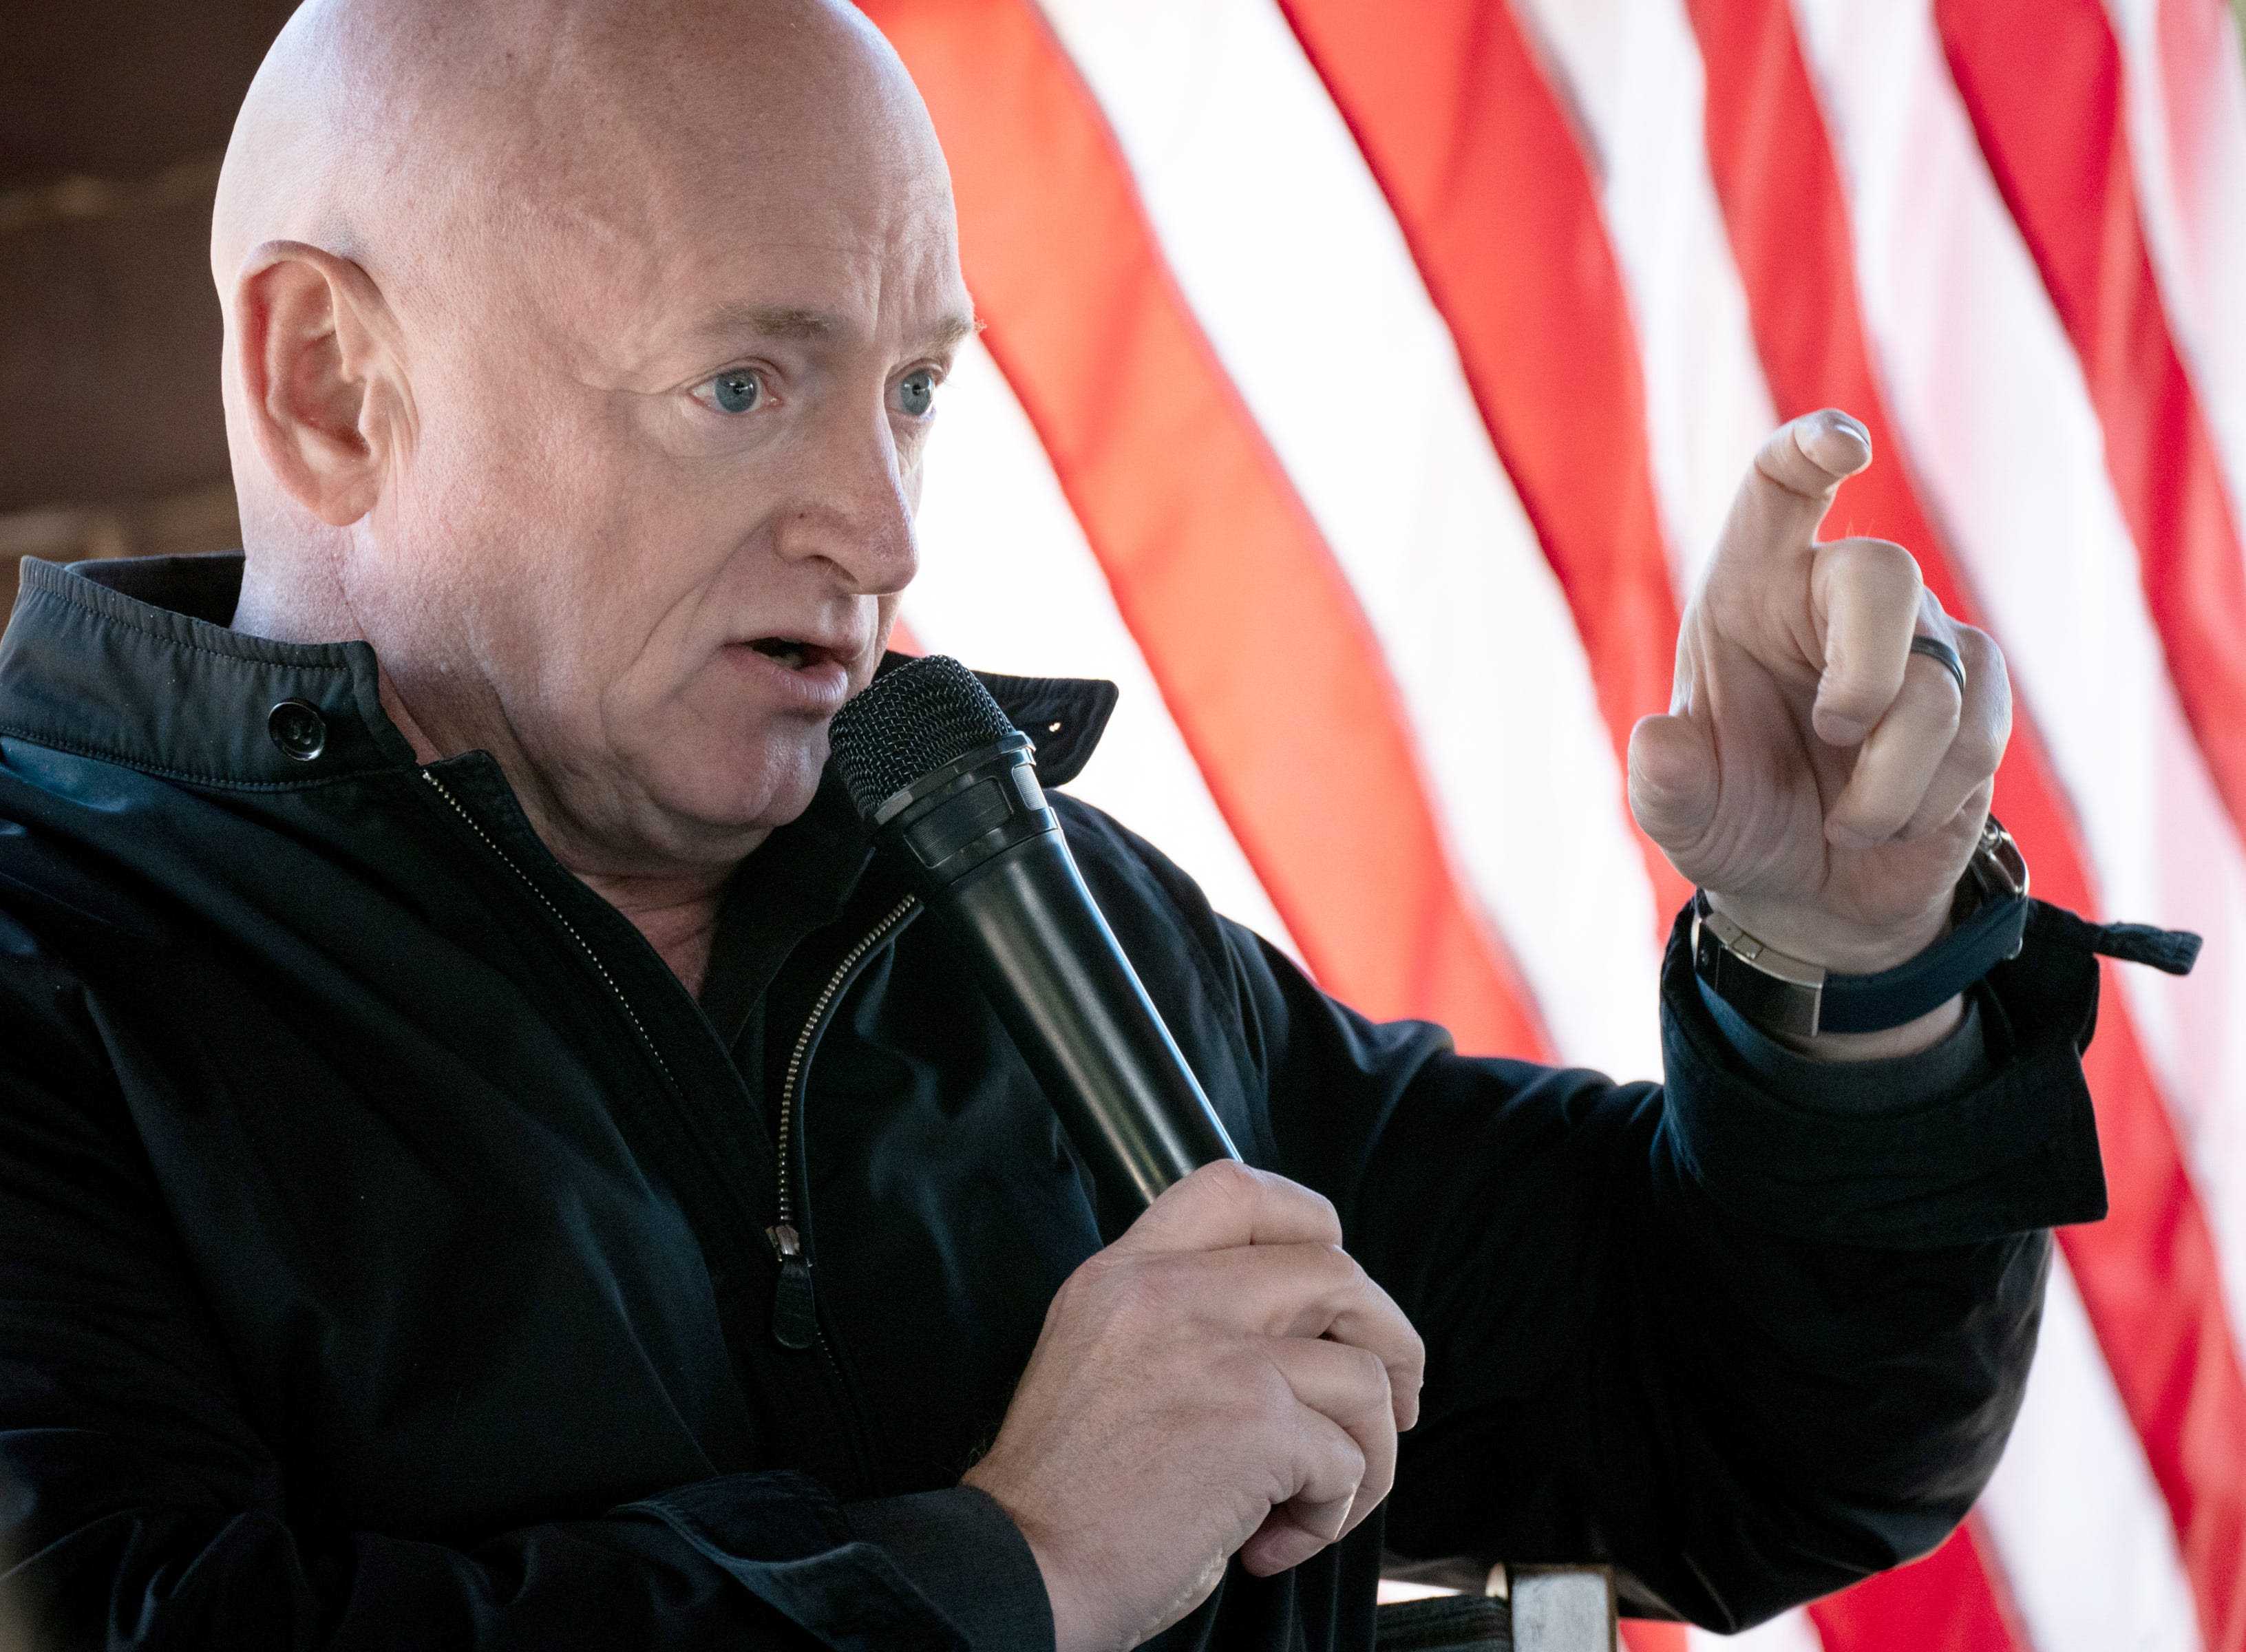 Mark Kelly was there when I needed help for my daughter. He's the VP America needs